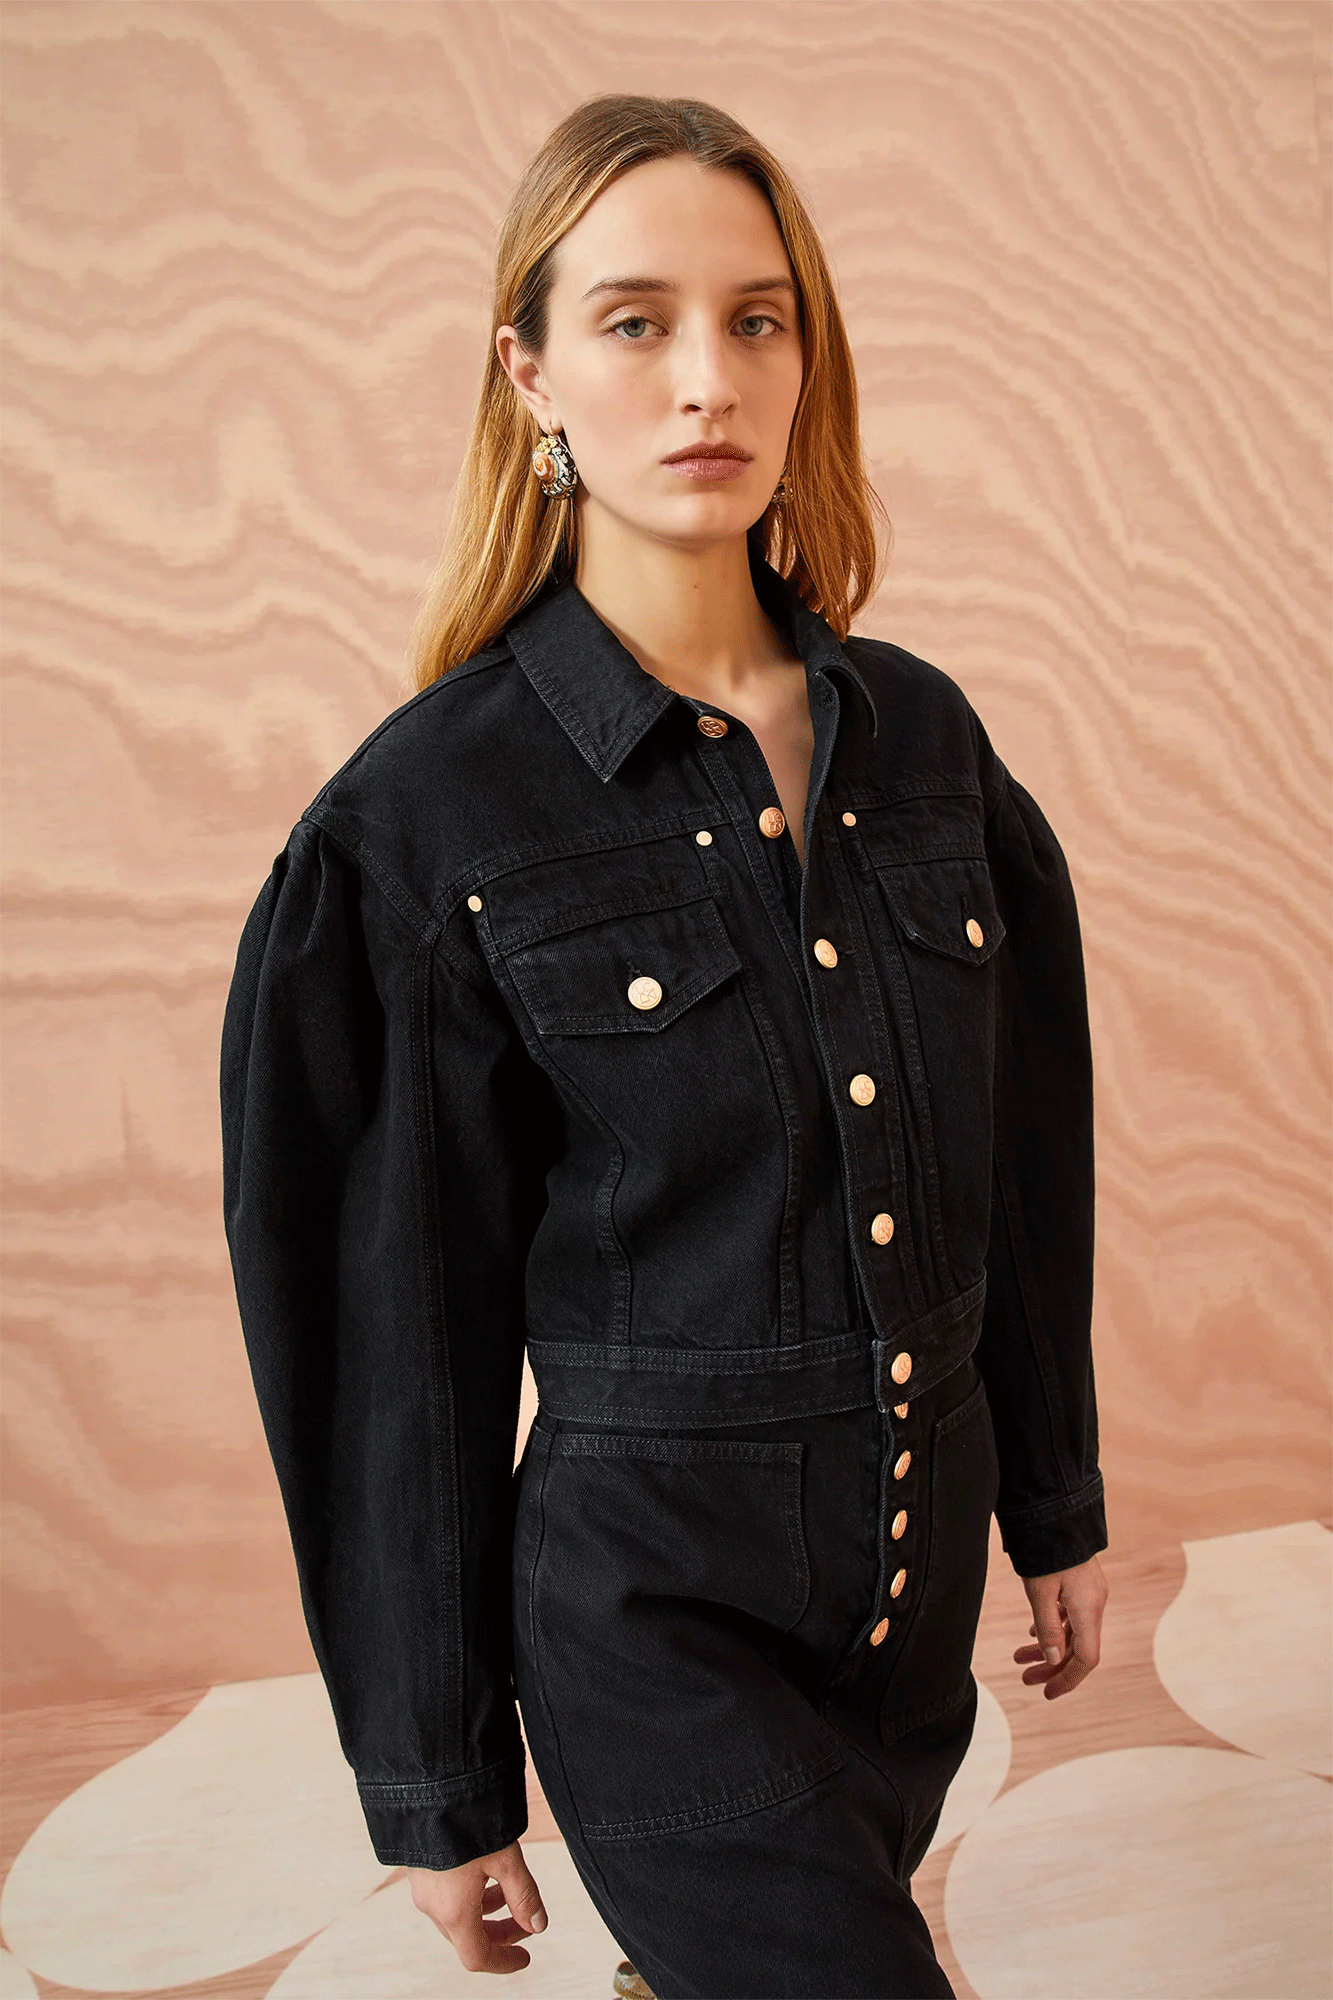 The Cosette Jacket is a luxurious addition to Ulla Johnson's premium denim collection.